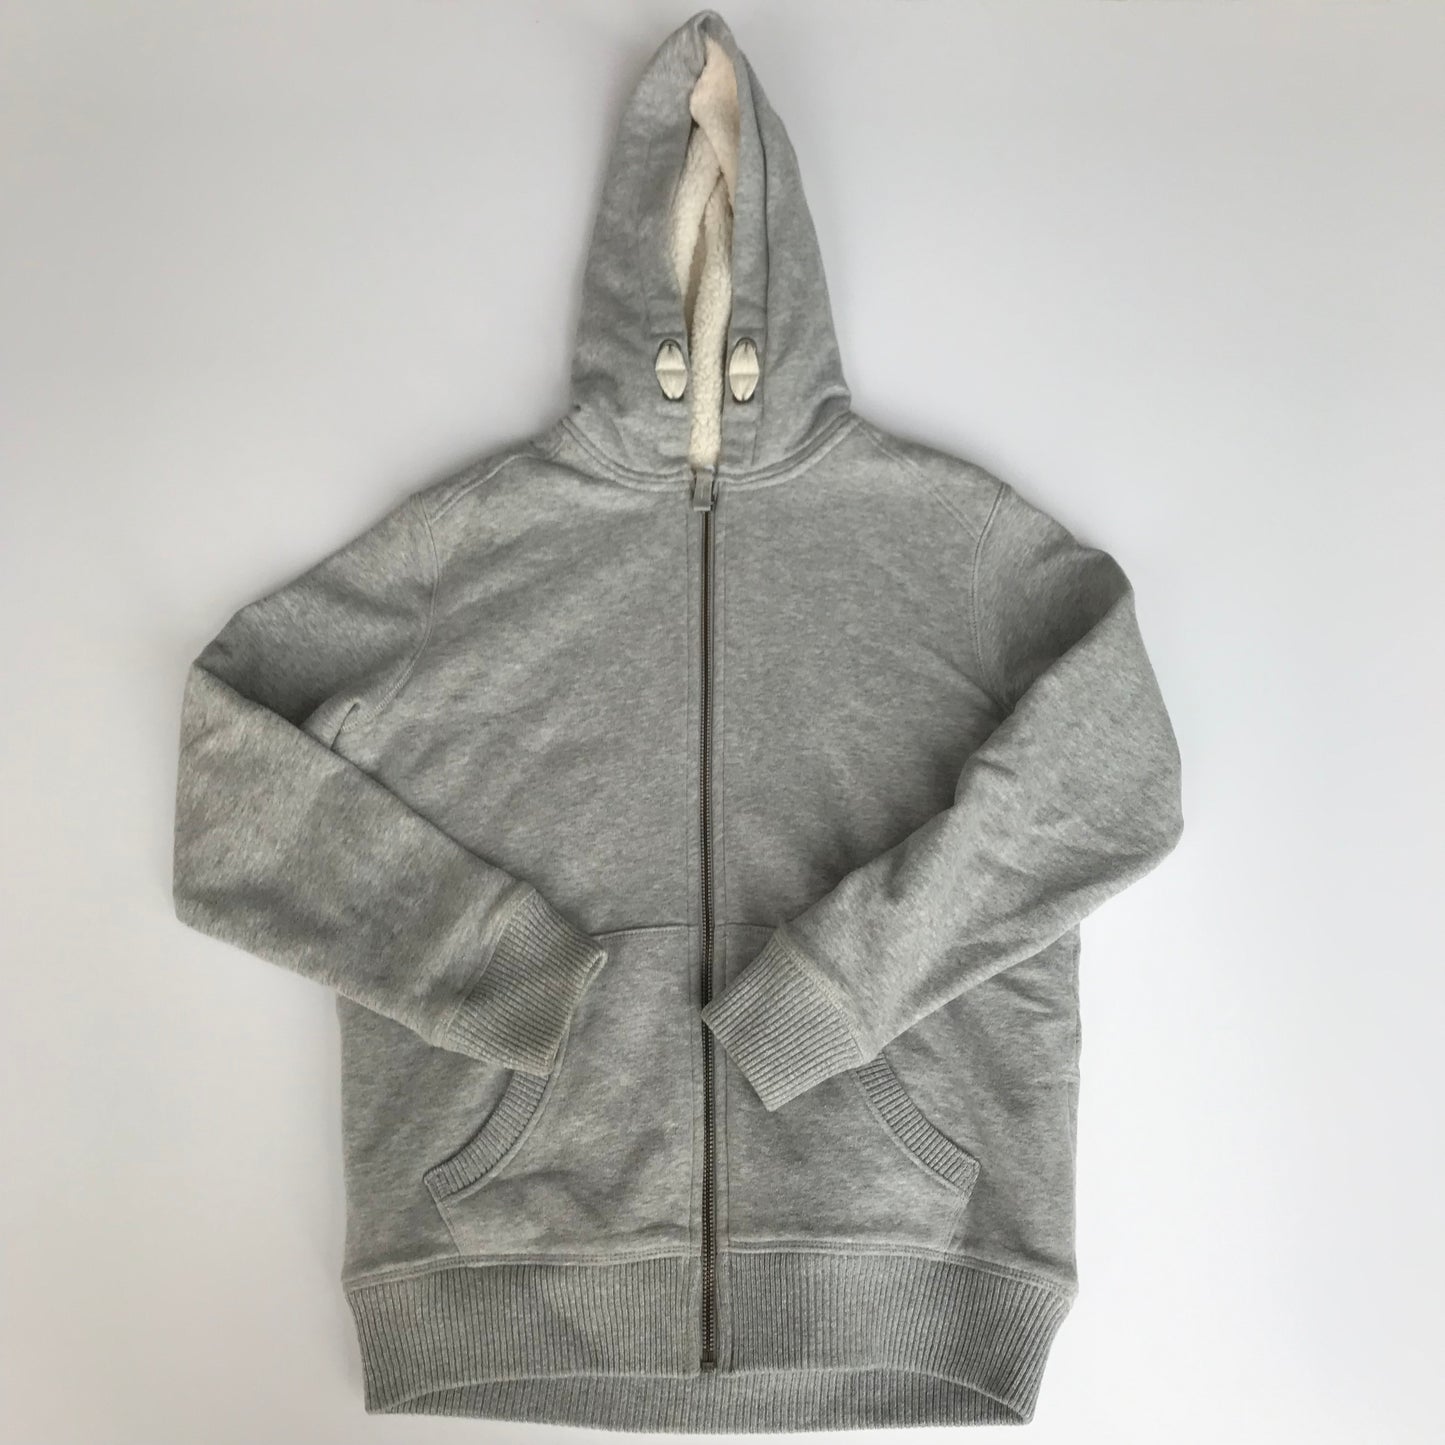 M&S Grey Hoodie with Fleecy Lining Age 11